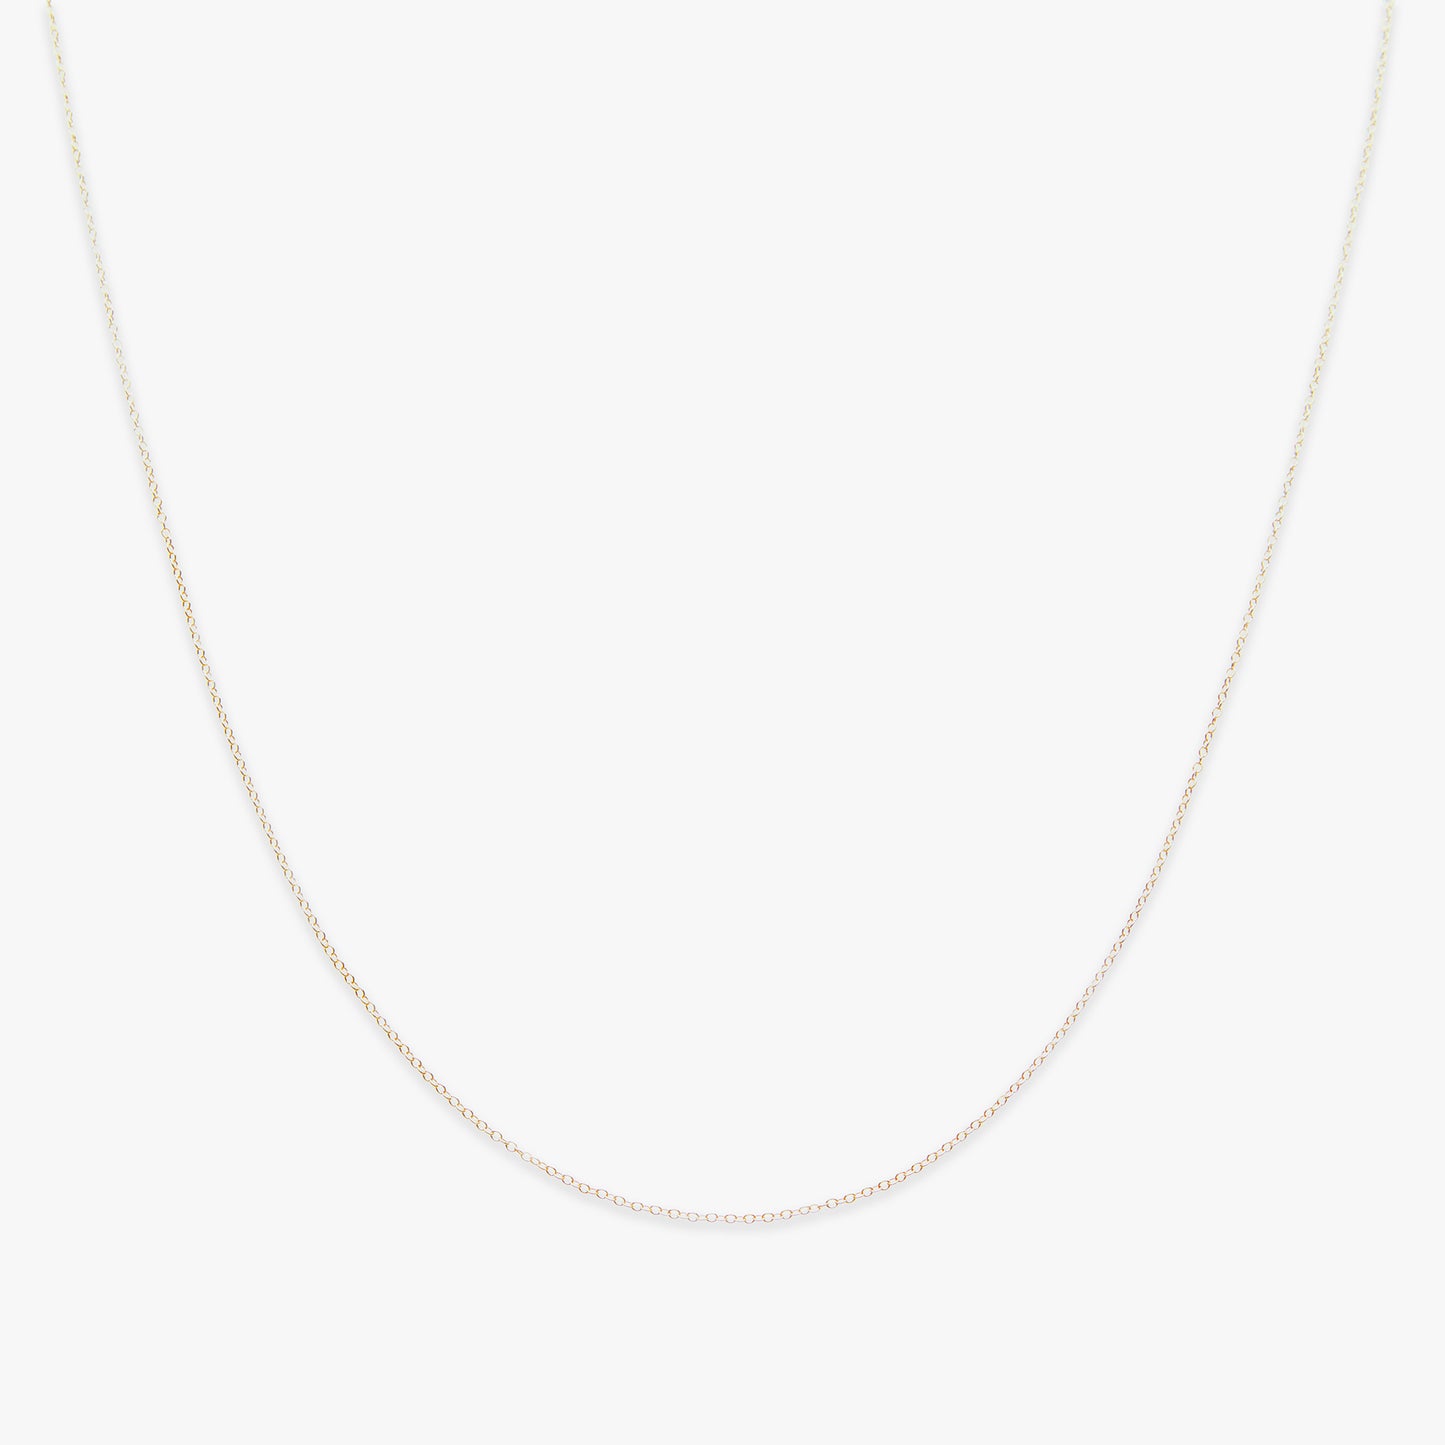 Basic oval chain ketting gold filled